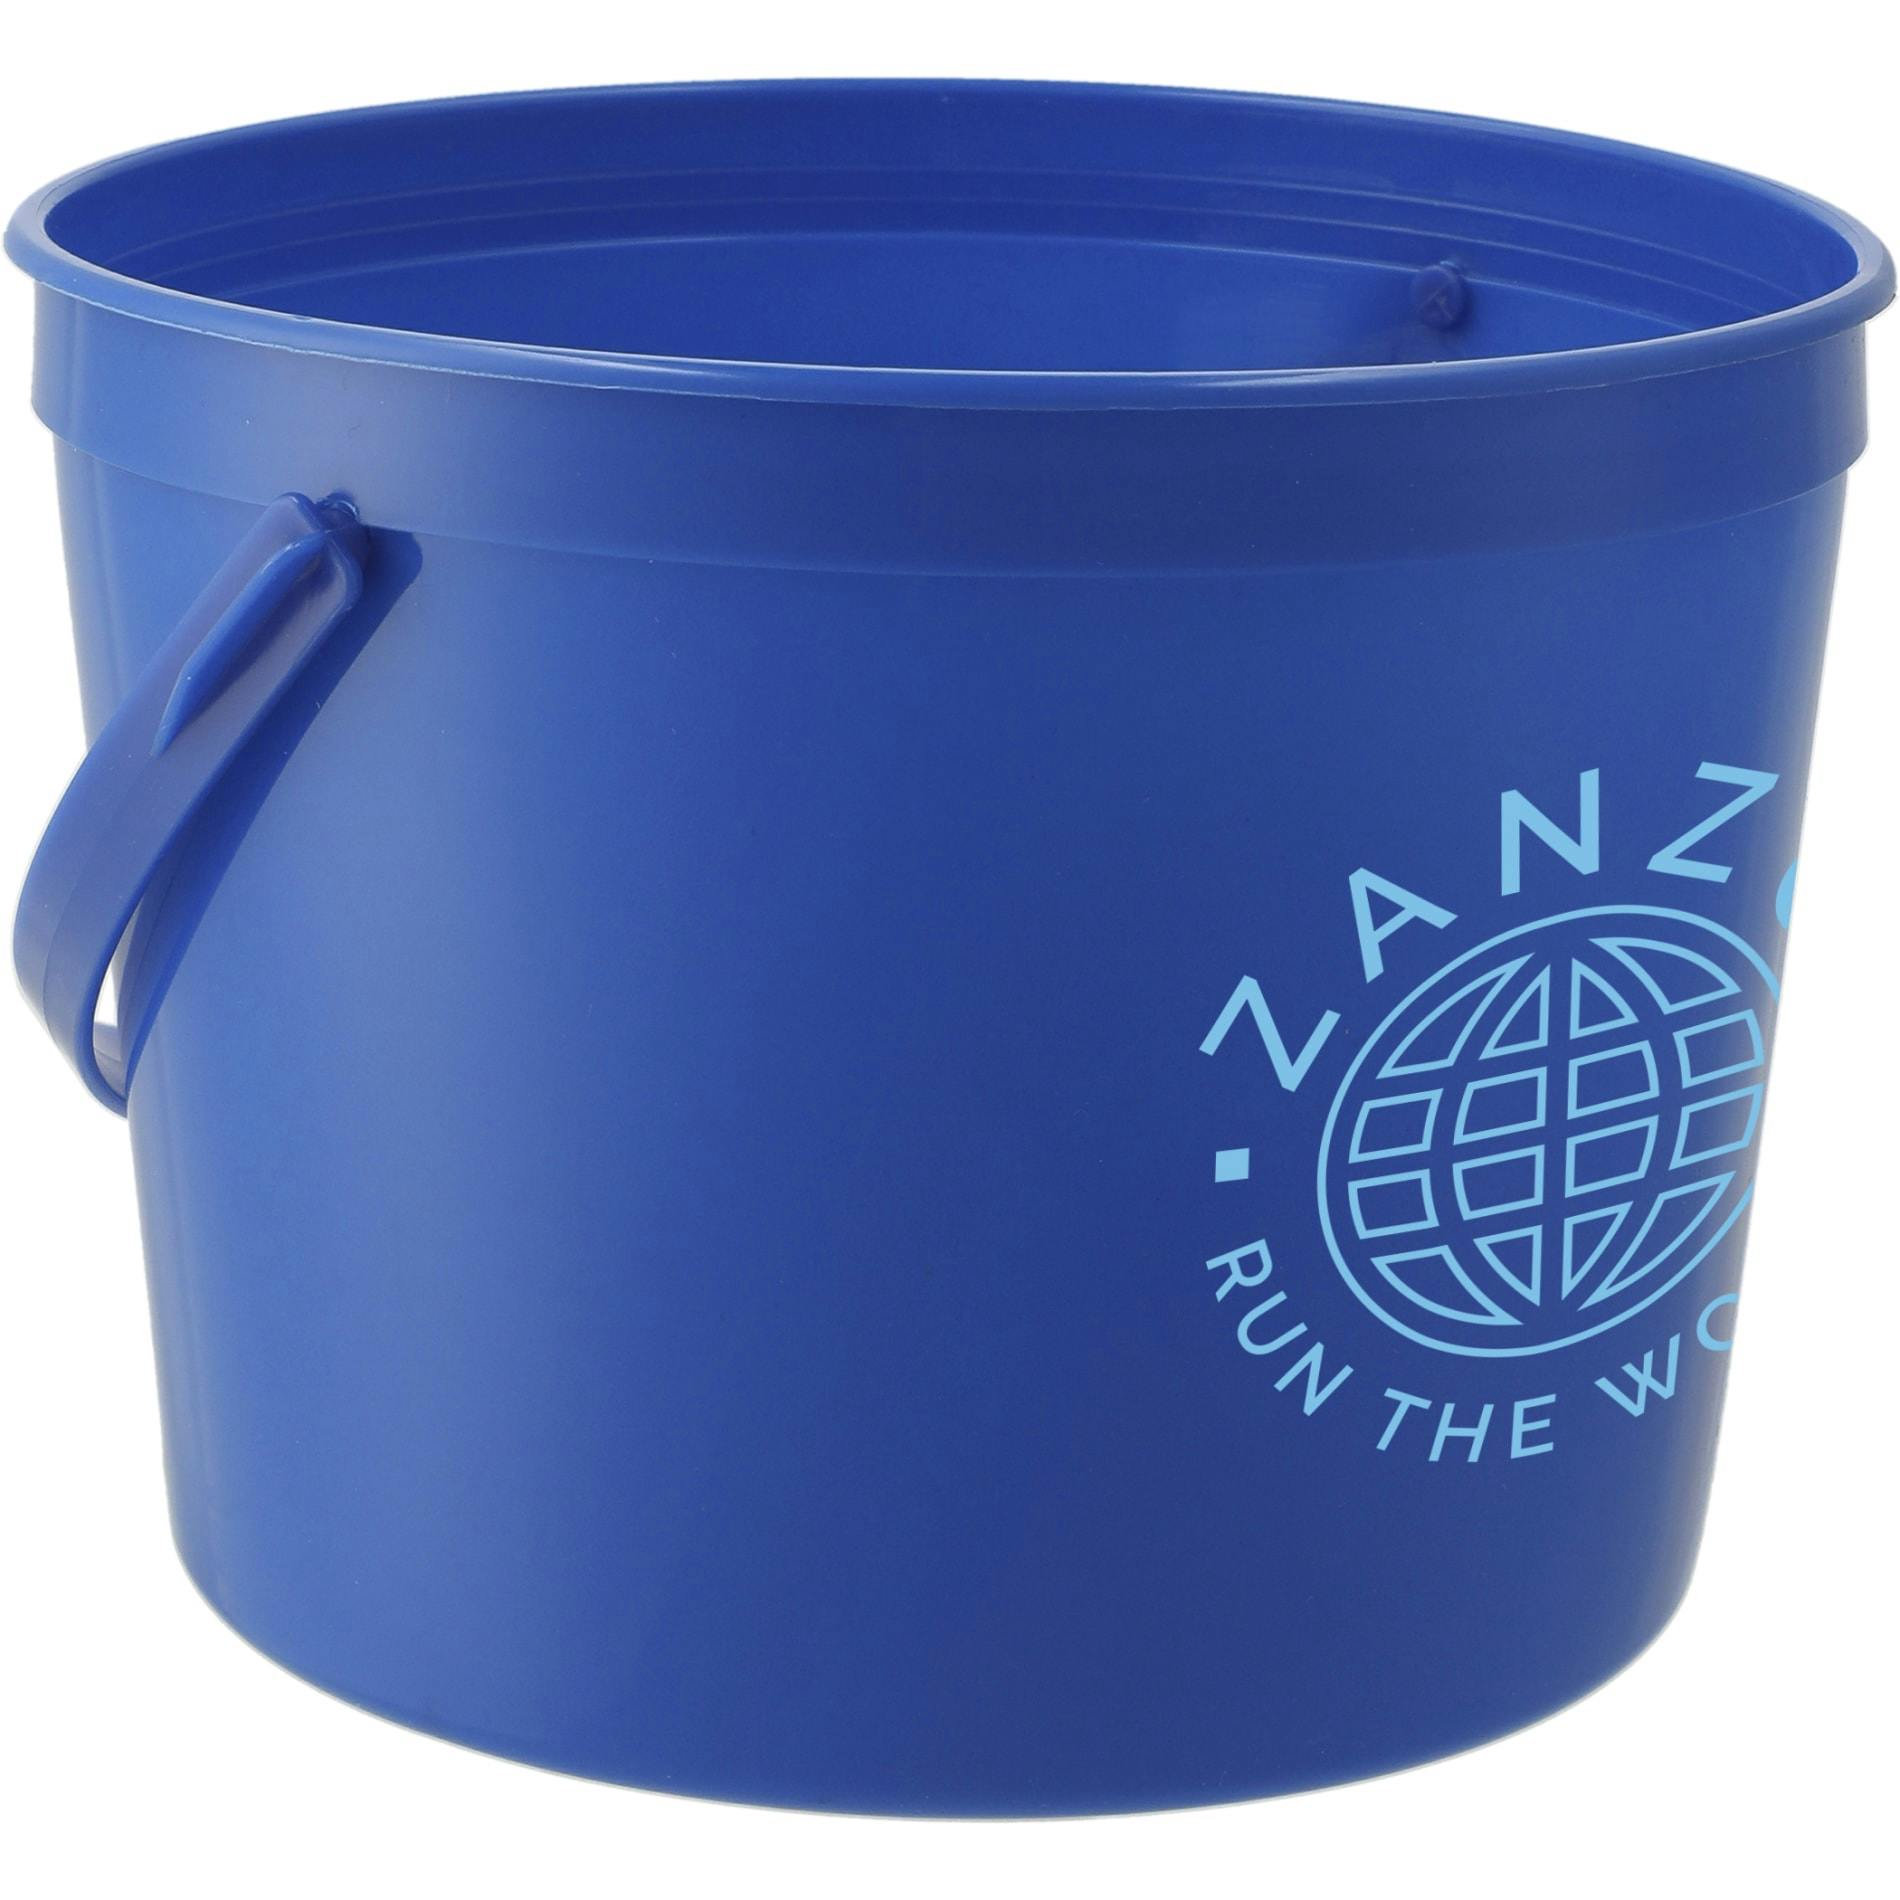 64oz Pail with Handle - additional Image 2